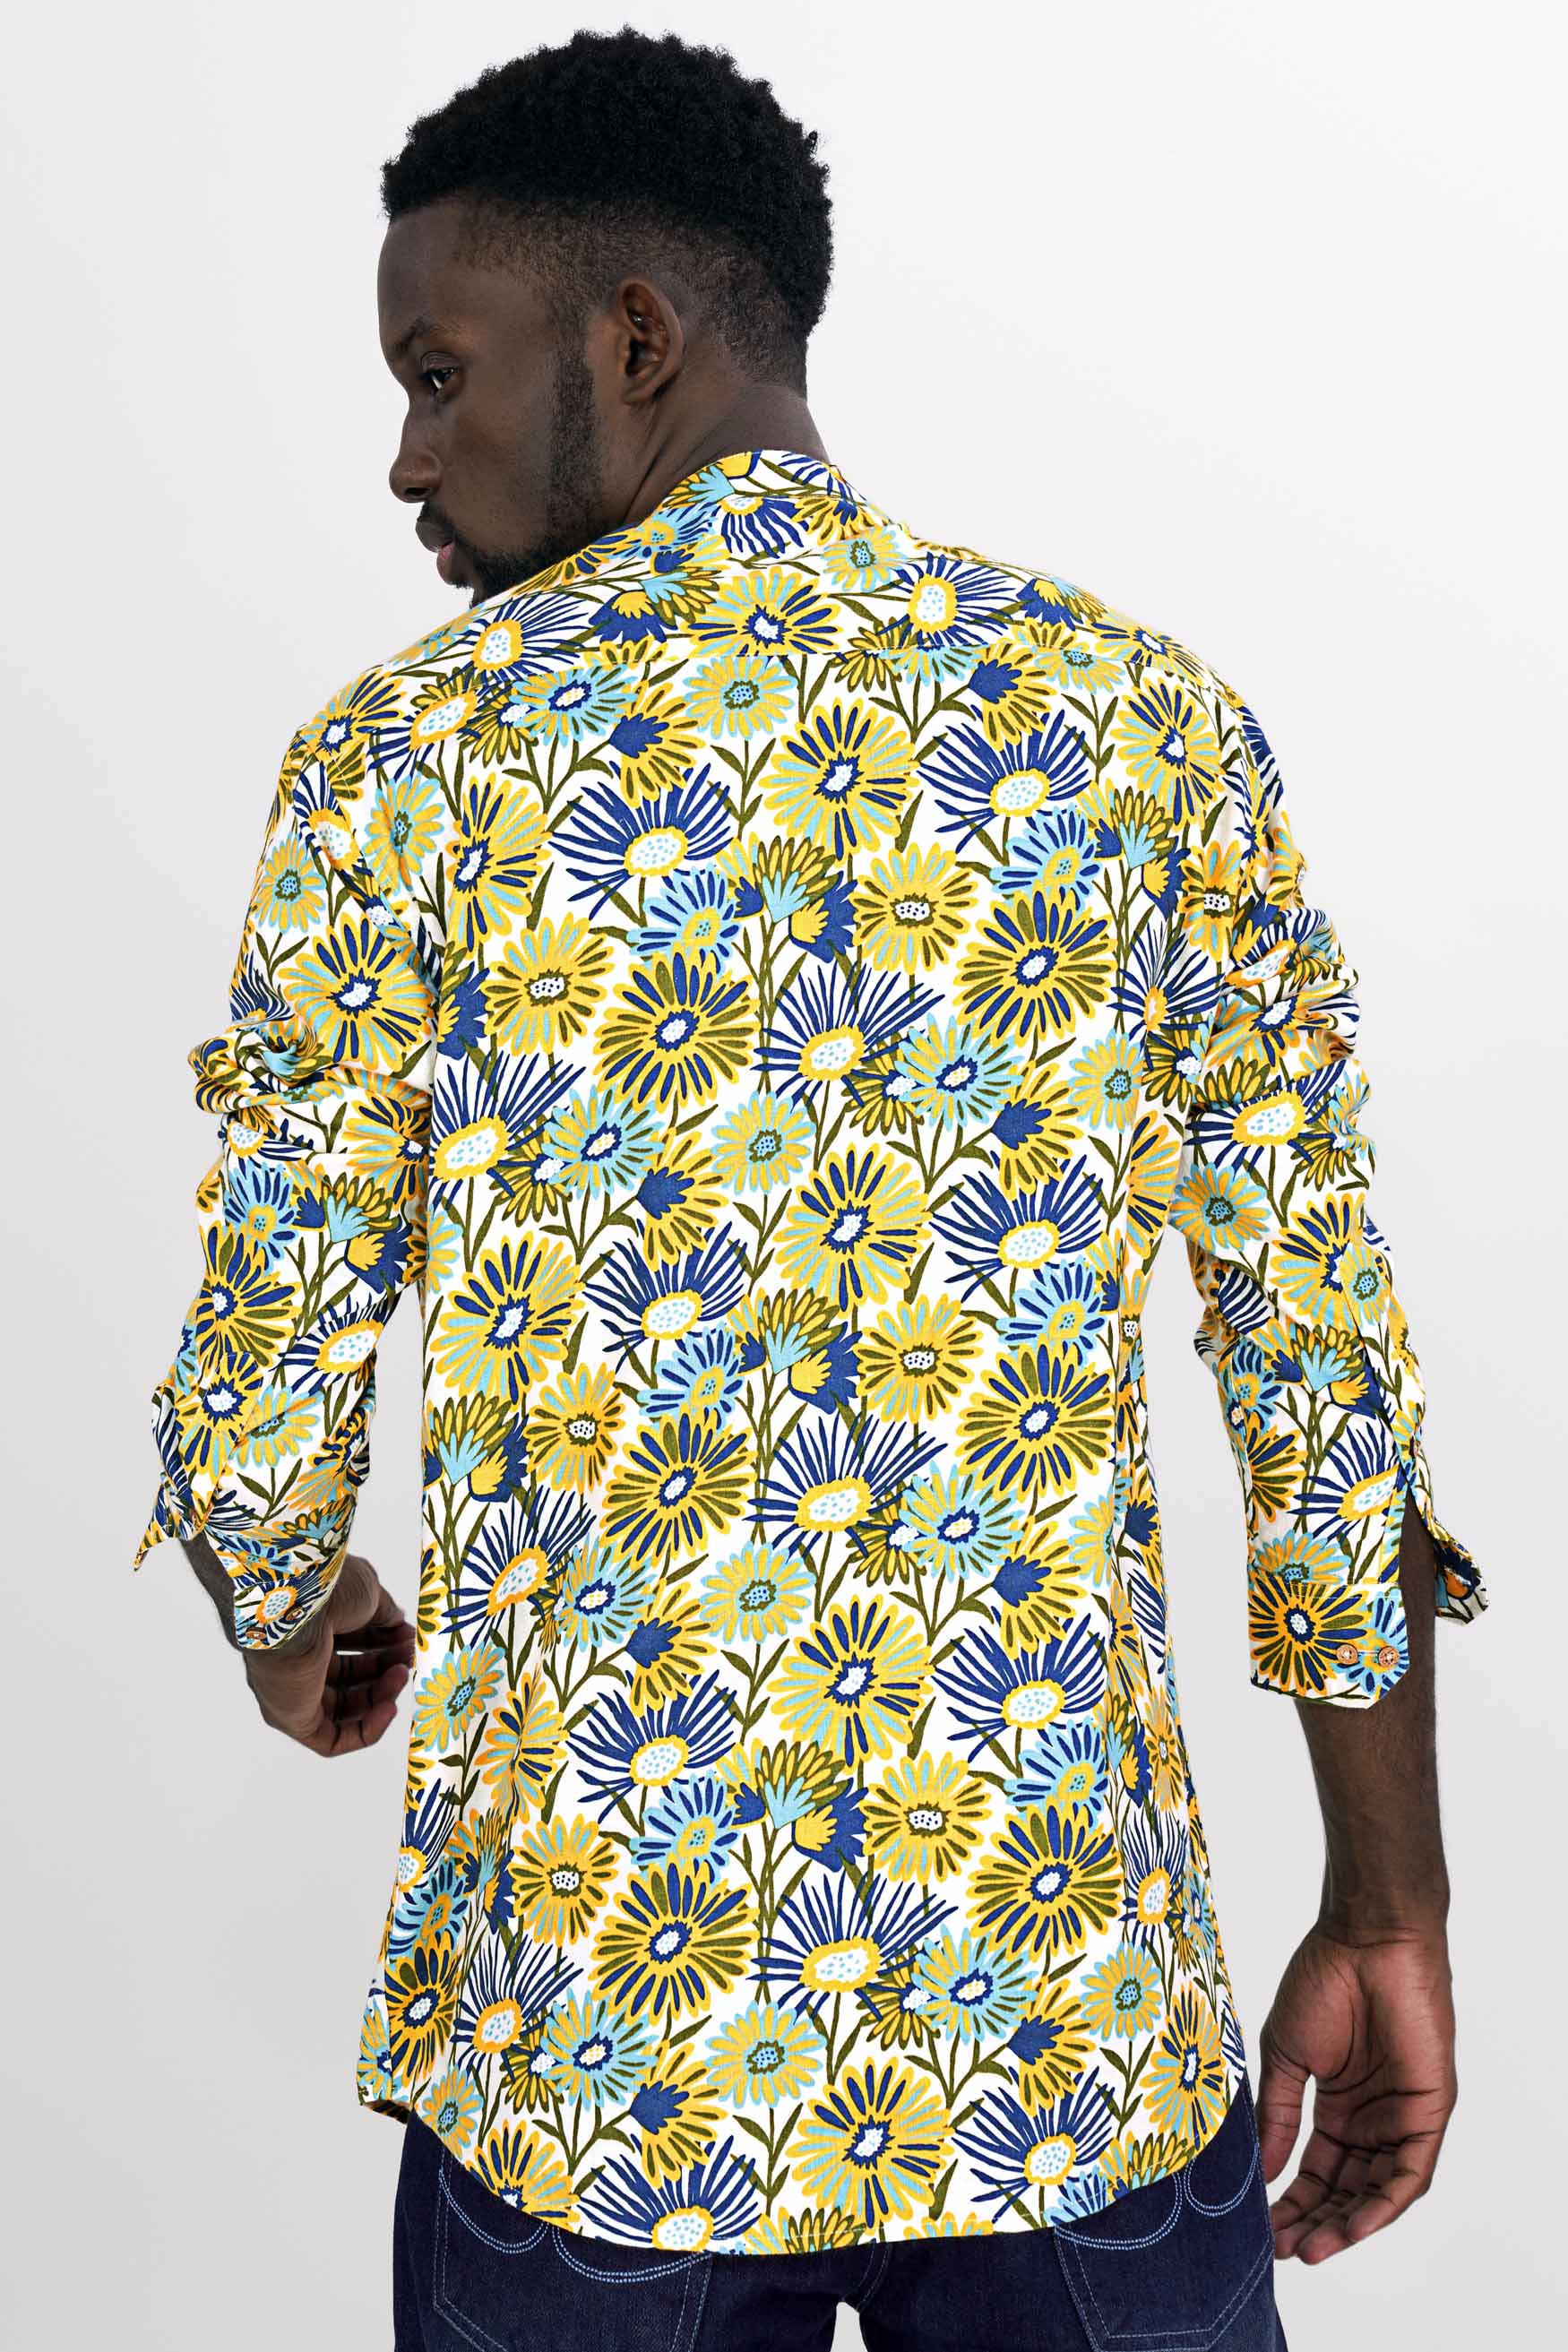 Sweetcorn Yellow with Bright White Multicolour Floral Printed Hand Painted Royal Oxford Kurta Designer Shirt 6235-KS-ART-38, 6235-KS-ART-H-38, 6235-KS-ART-39, 6235-KS-ART-H-39, 6235-KS-ART-40, 6235-KS-ART-H-40, 6235-KS-ART-42, 6235-KS-ART-H-42, 6235-KS-ART-44, 6235-KS-ART-H-44, 6235-KS-ART-46, 6235-KS-ART-H-46, 6235-KS-ART-48, 6235-KS-ART-H-48, 6235-KS-ART-50, 6235-KS-ART-H-50, 6235-KS-ART-52, 6235-KS-ART-H-52